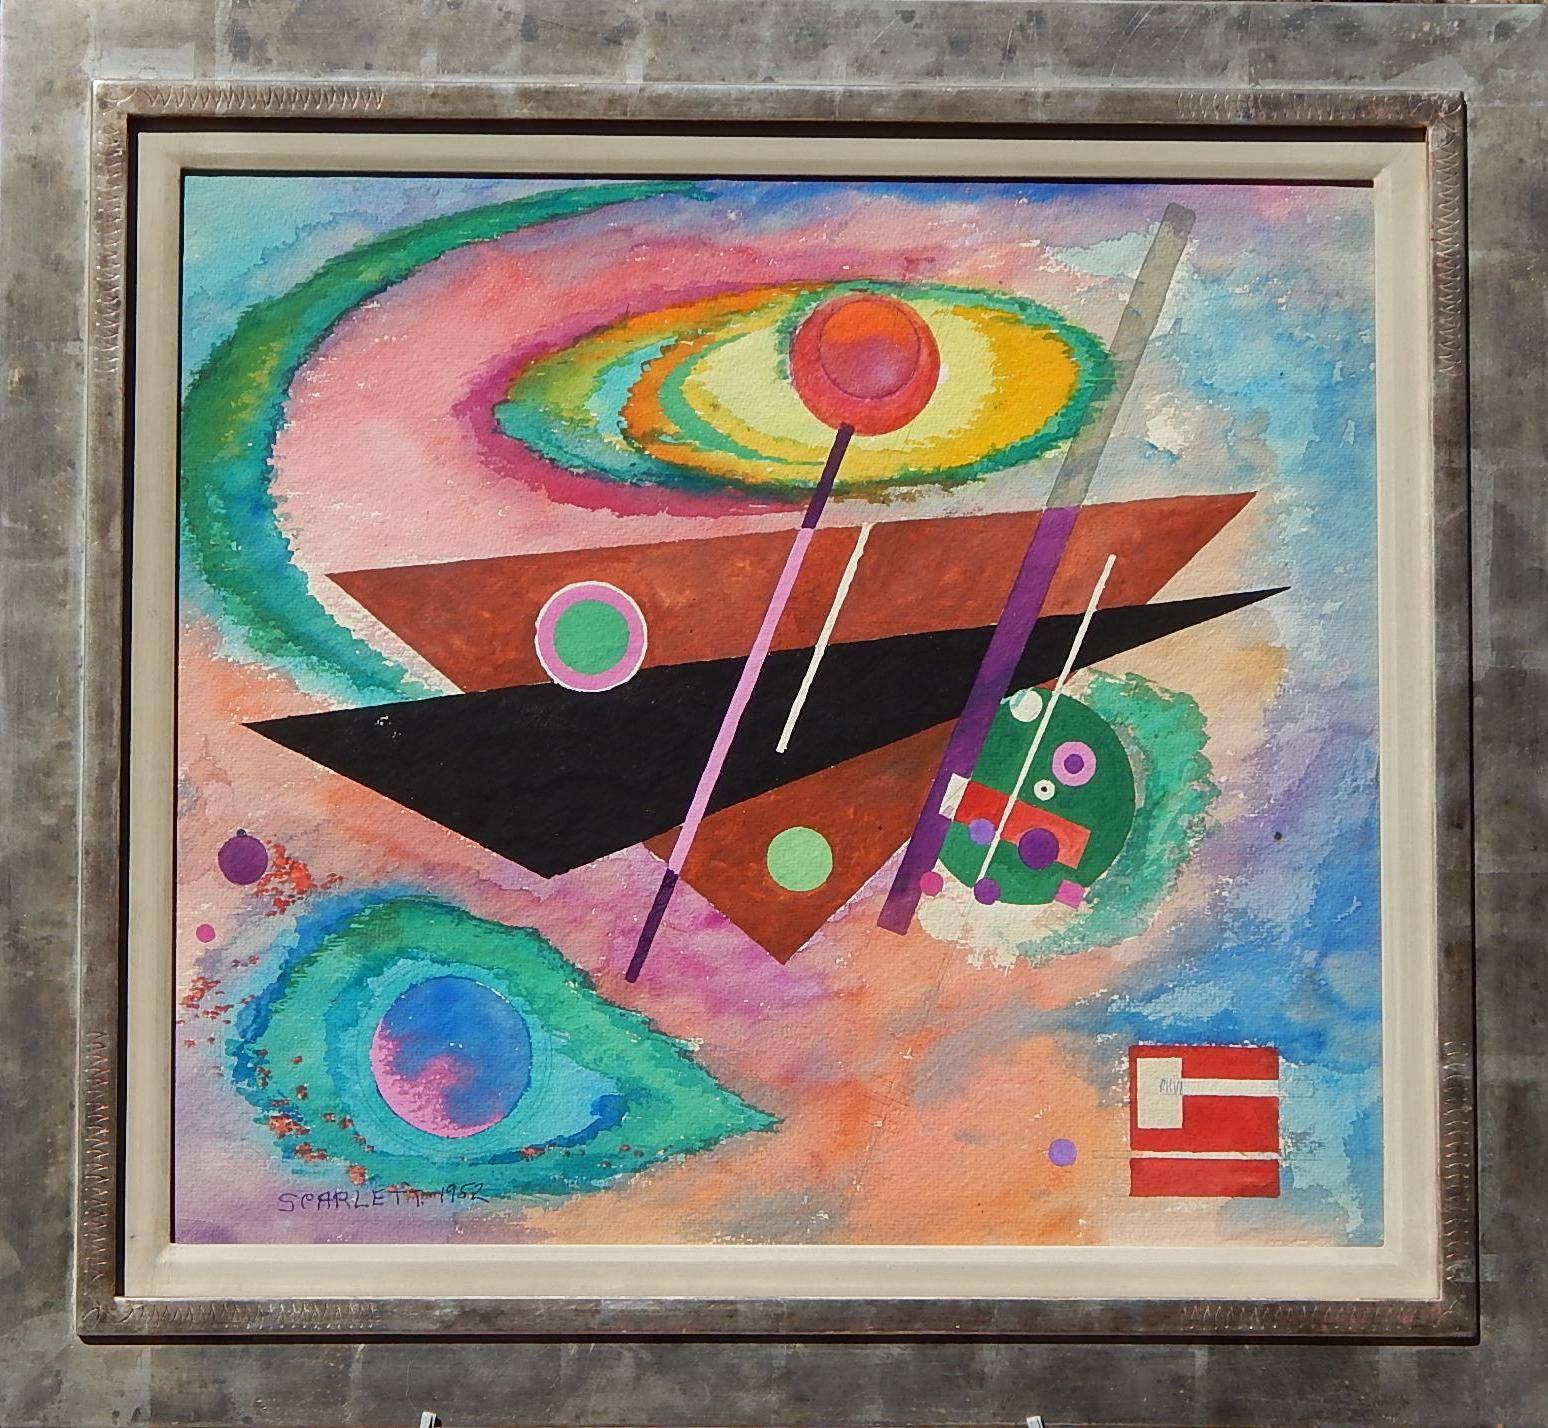 Abstract watercolor by Rolph Scarlett, signed lower left.
A great example by Scarlett. Measures: 19